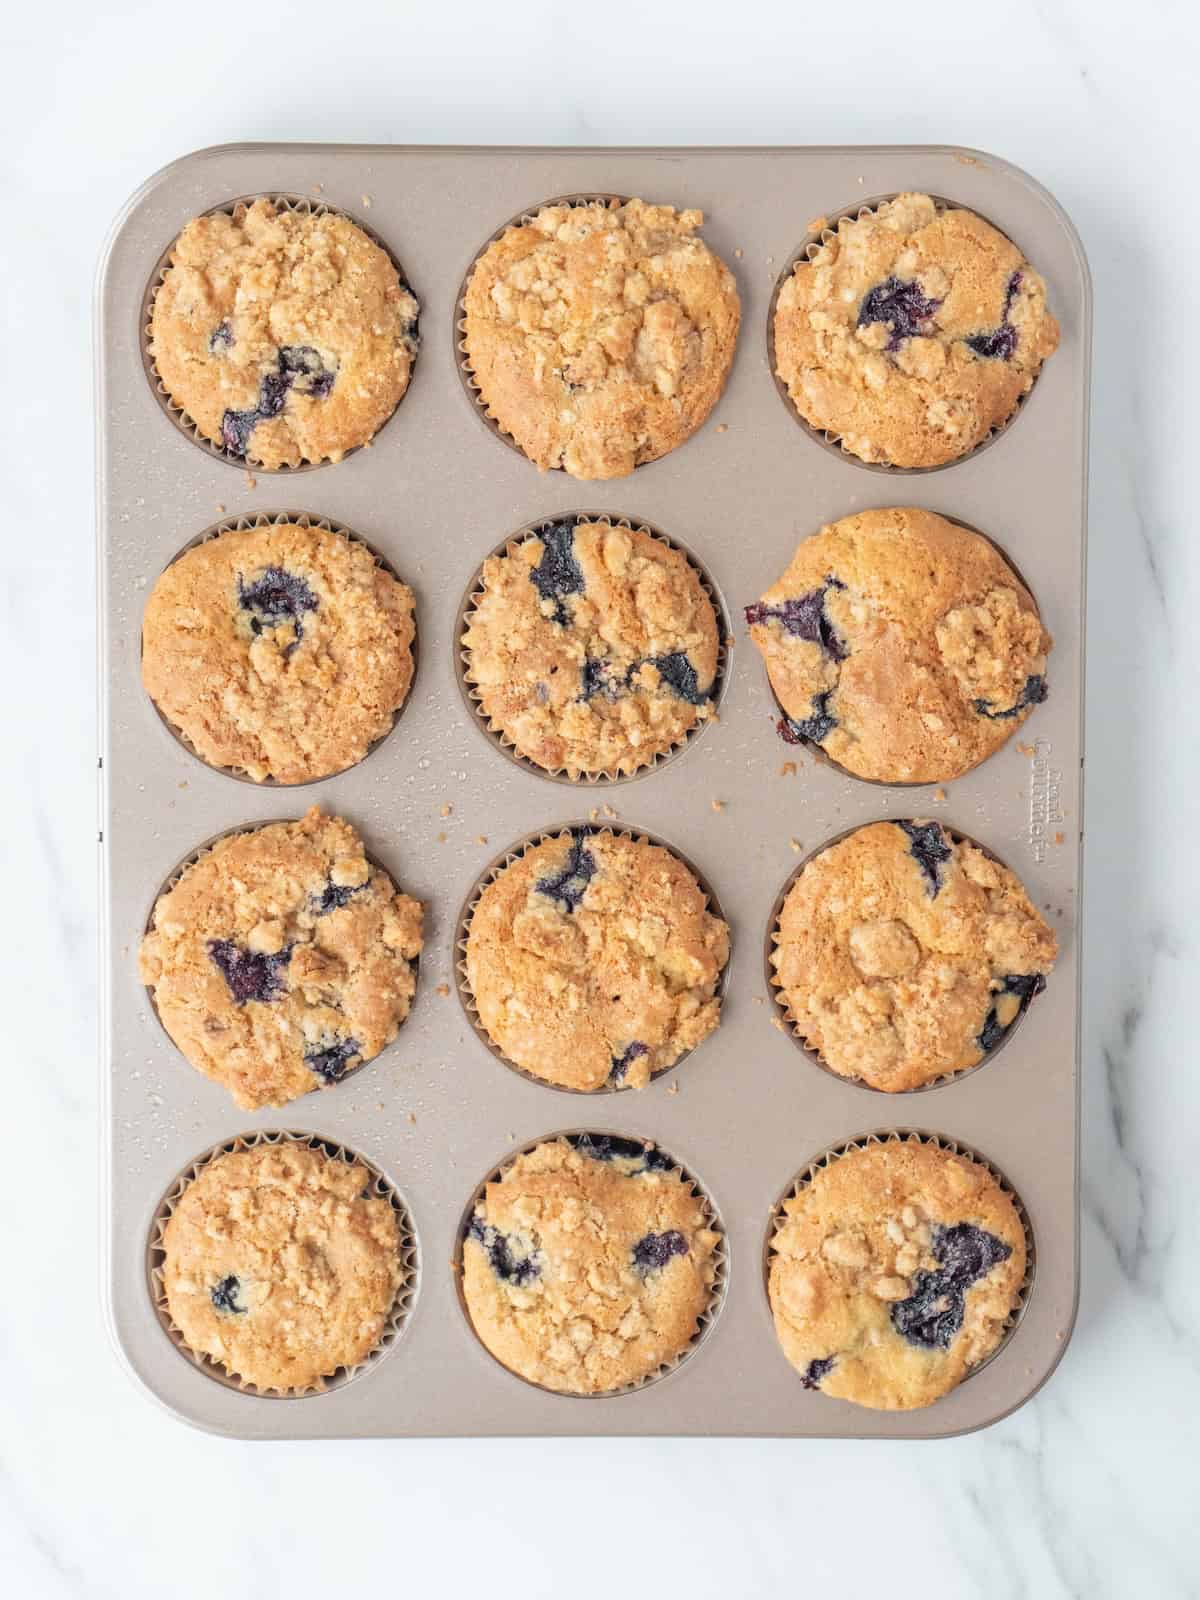 A cupcake baking pan with blueberry crumb muffins, baked and fresh out of the oven.